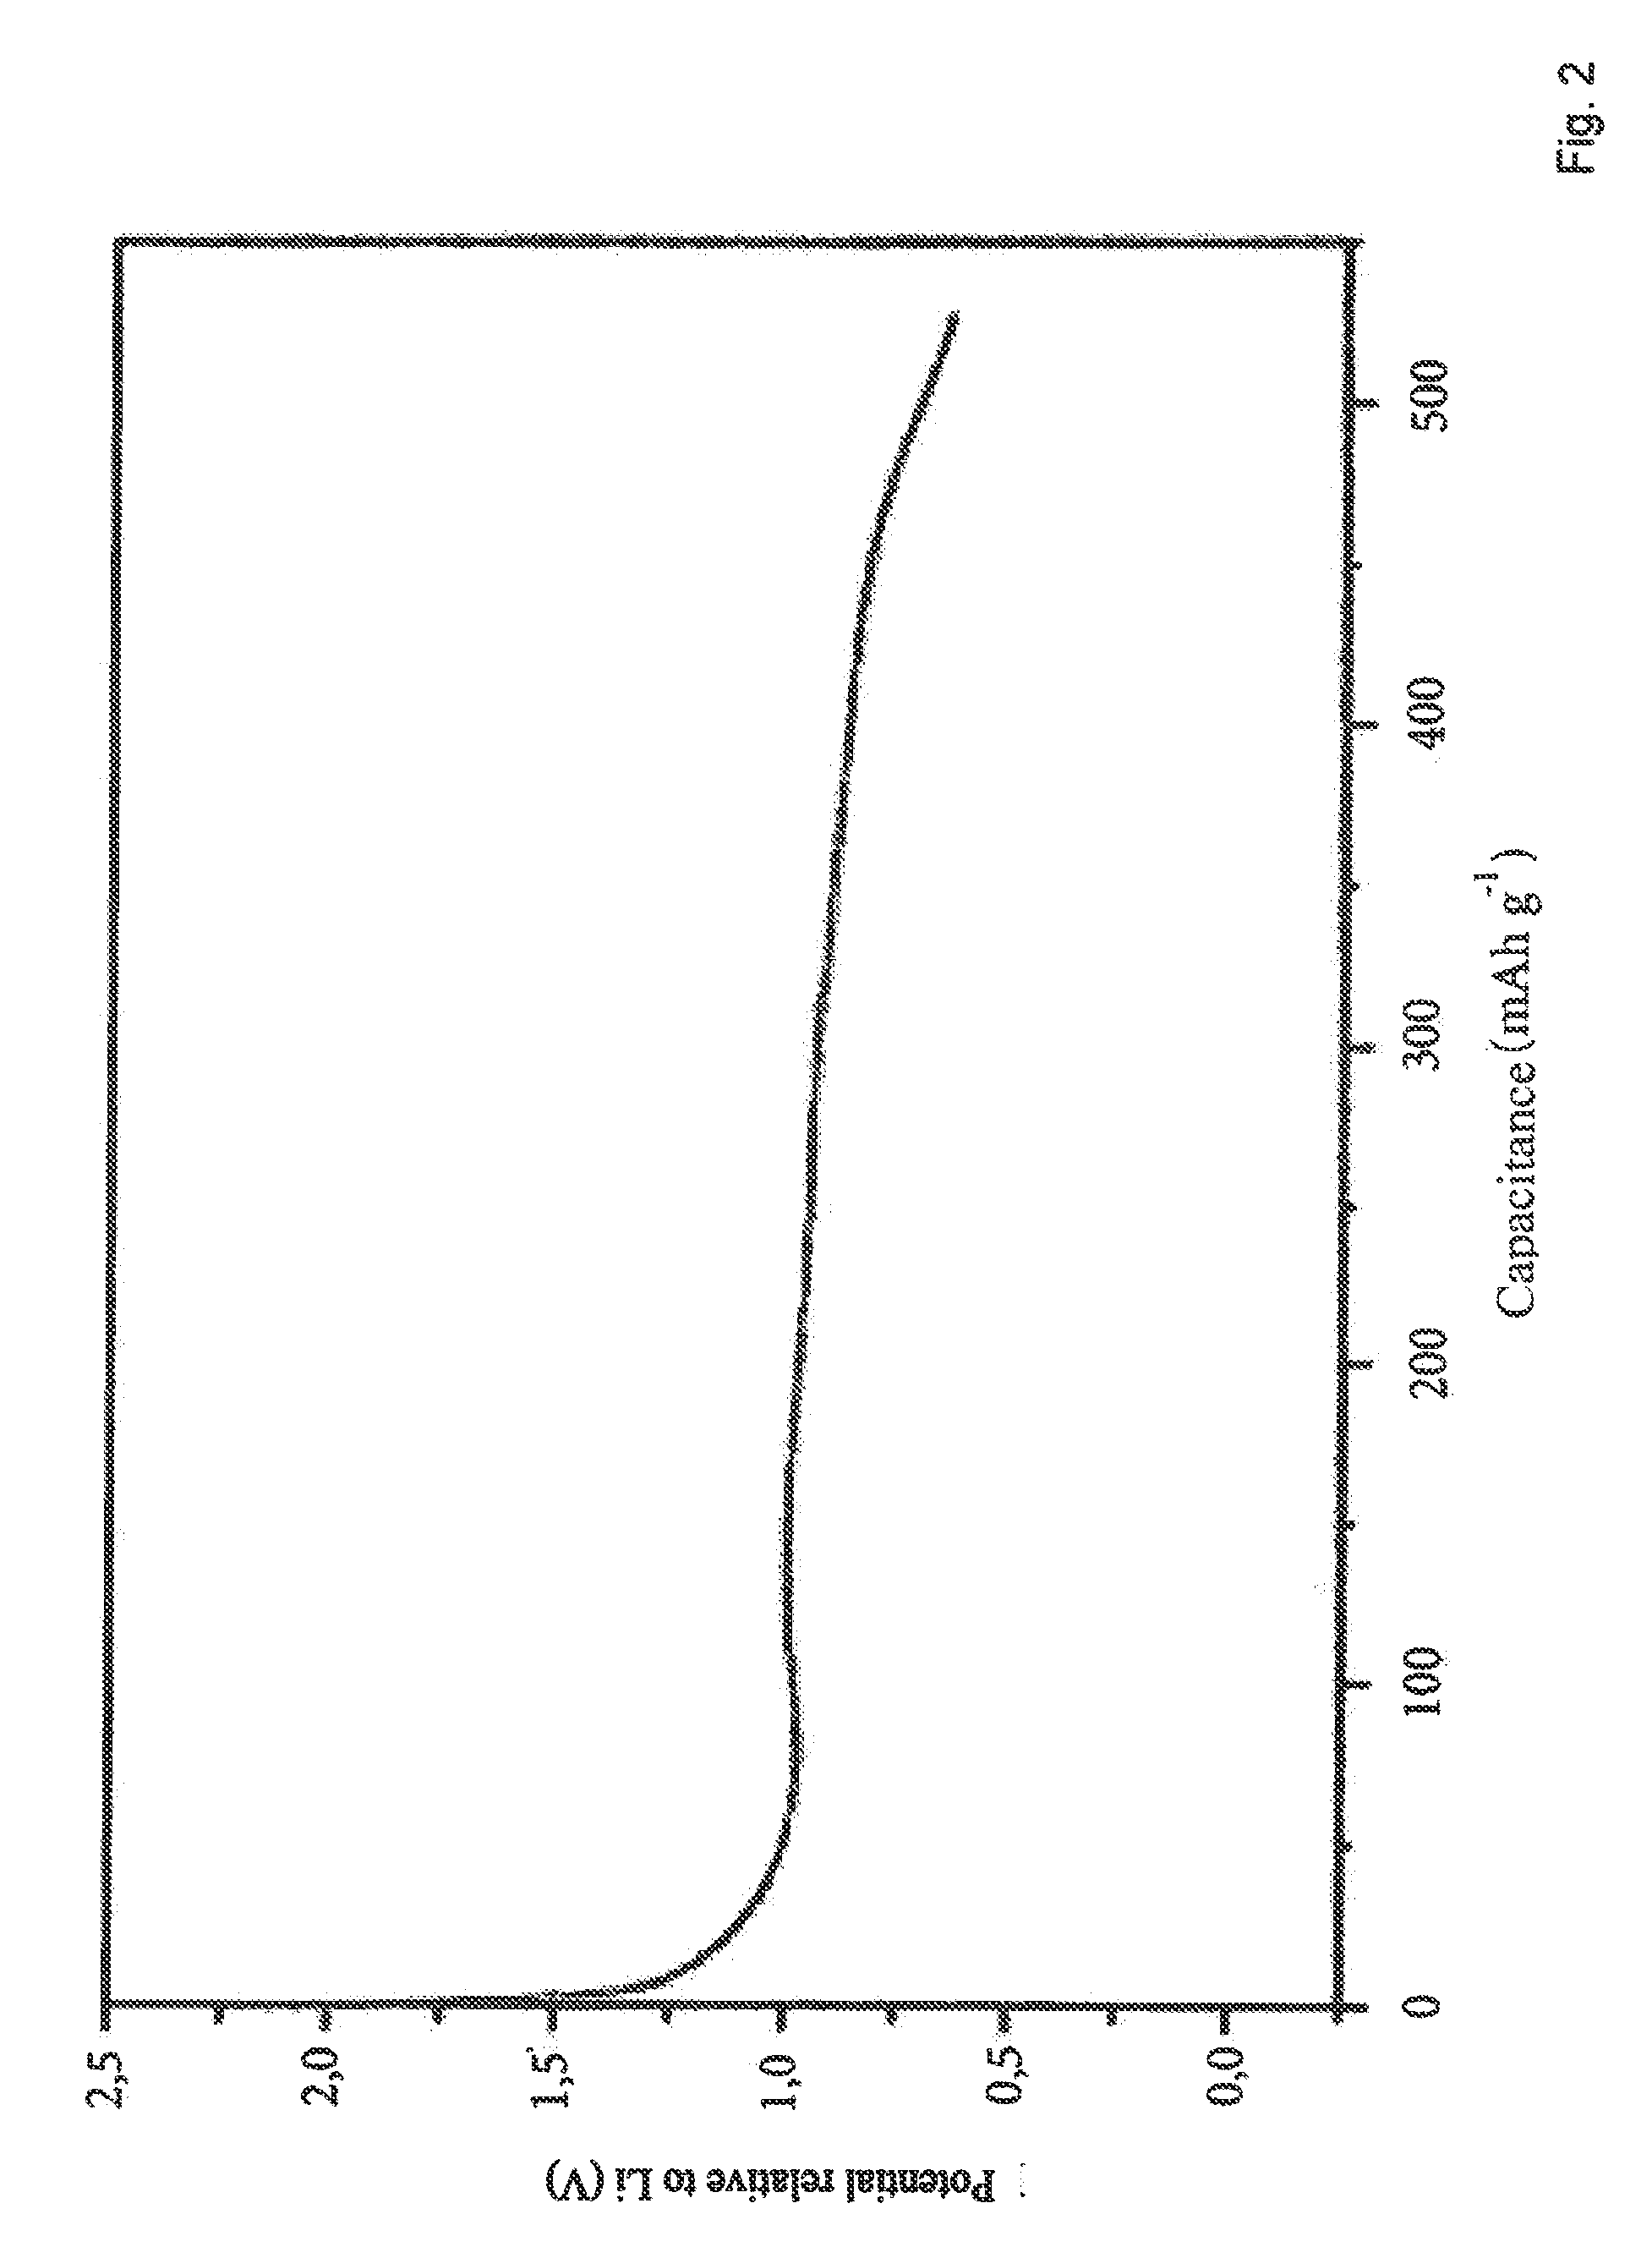 Aluminum-based hydride anodes and galvanic elements containing aluminum-based hydride anodes